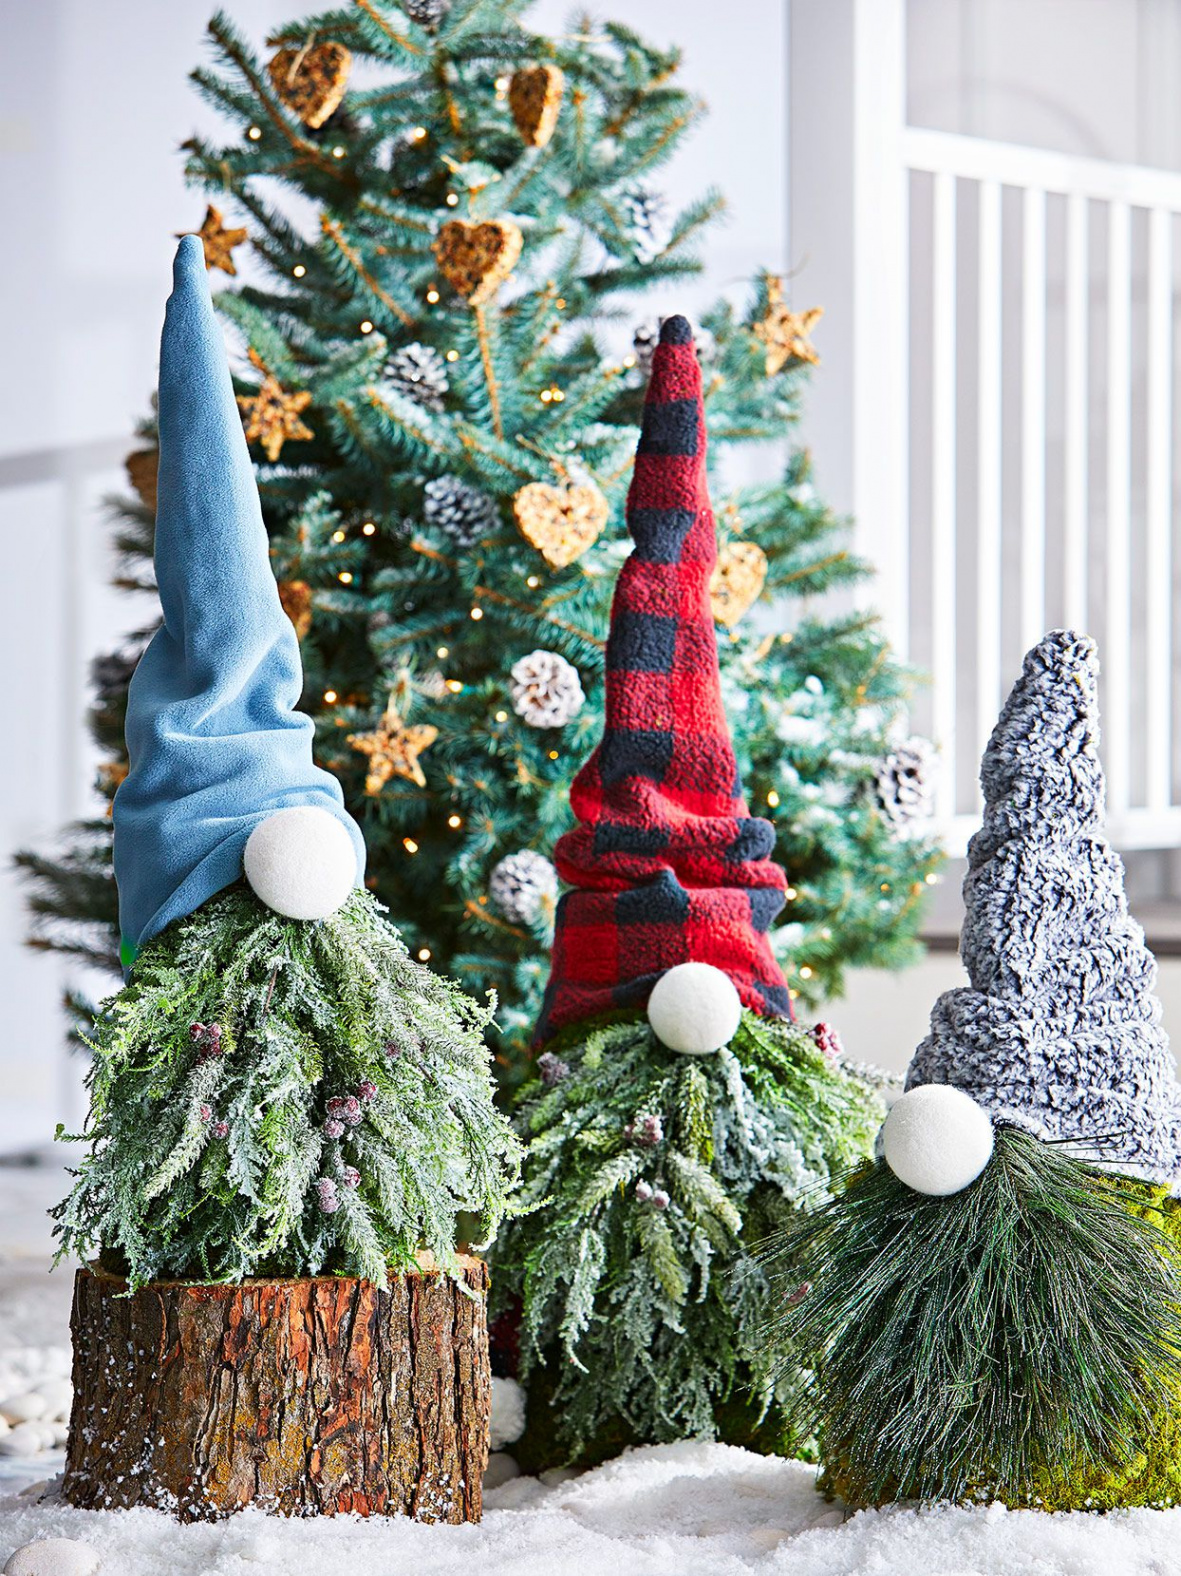 DIY Outdoor Christmas Decorations You Can Make in an Afternoon